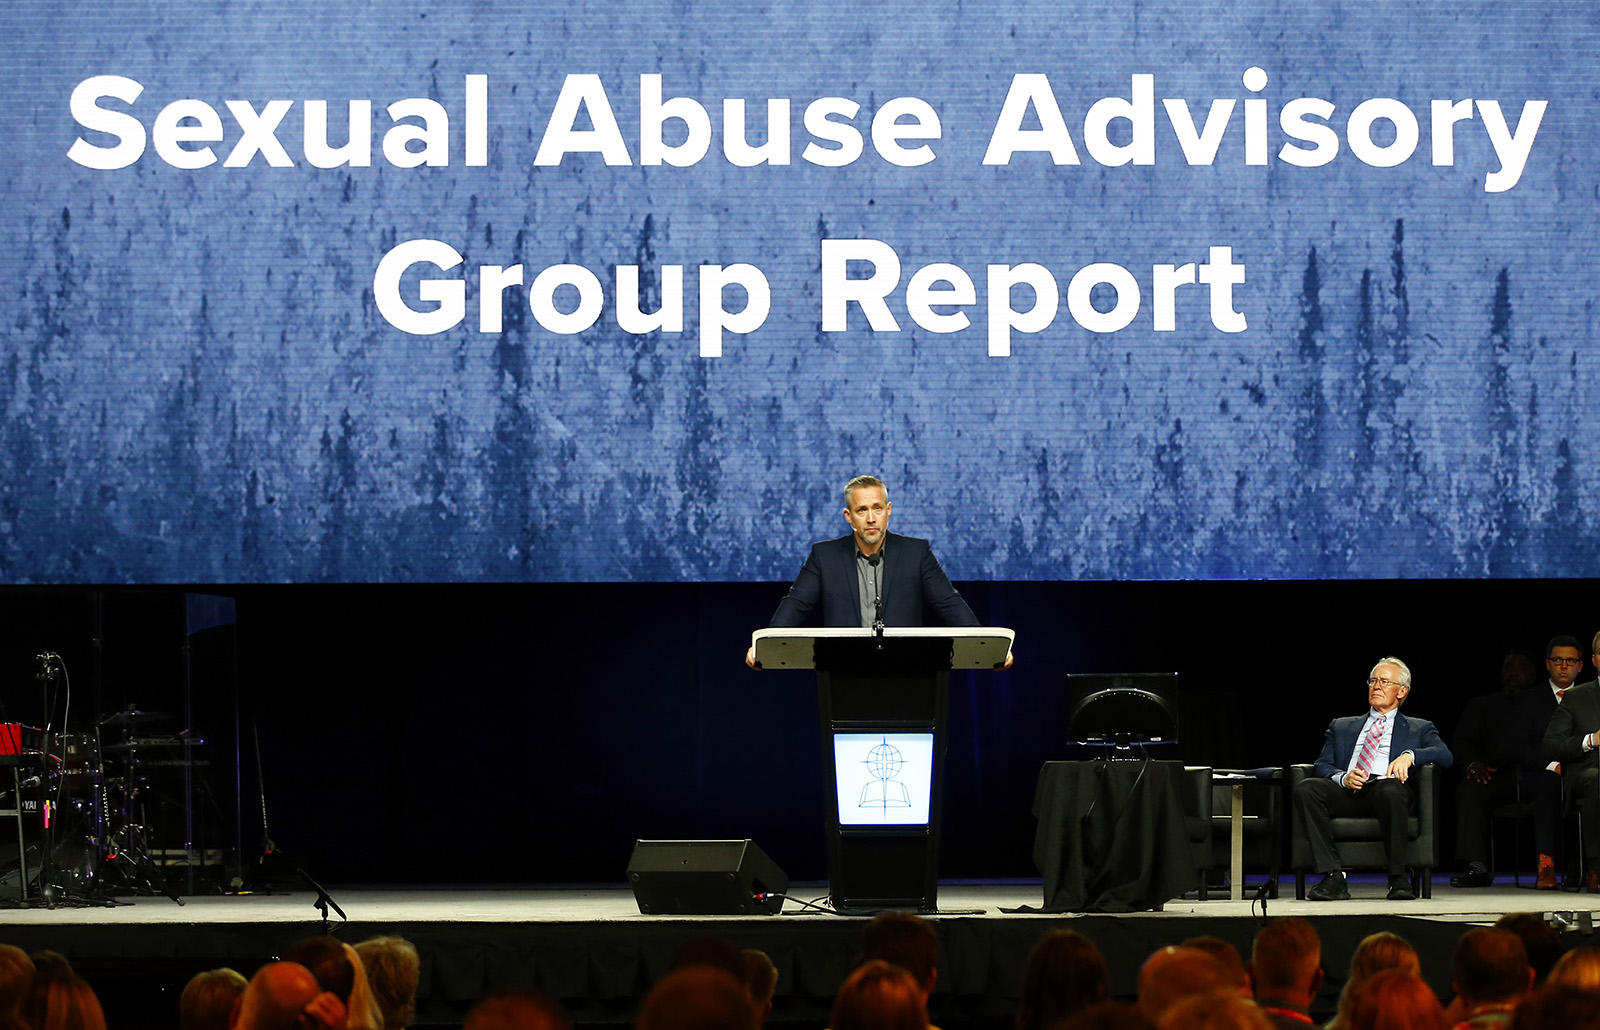 SBC President J.D. Greear speaks on sexual abuse during the annual meeting of the Southern Baptist Convention at the BJCC, June 12, 2019 in Birmingham, Ala. RNS photo by Butch Dill.